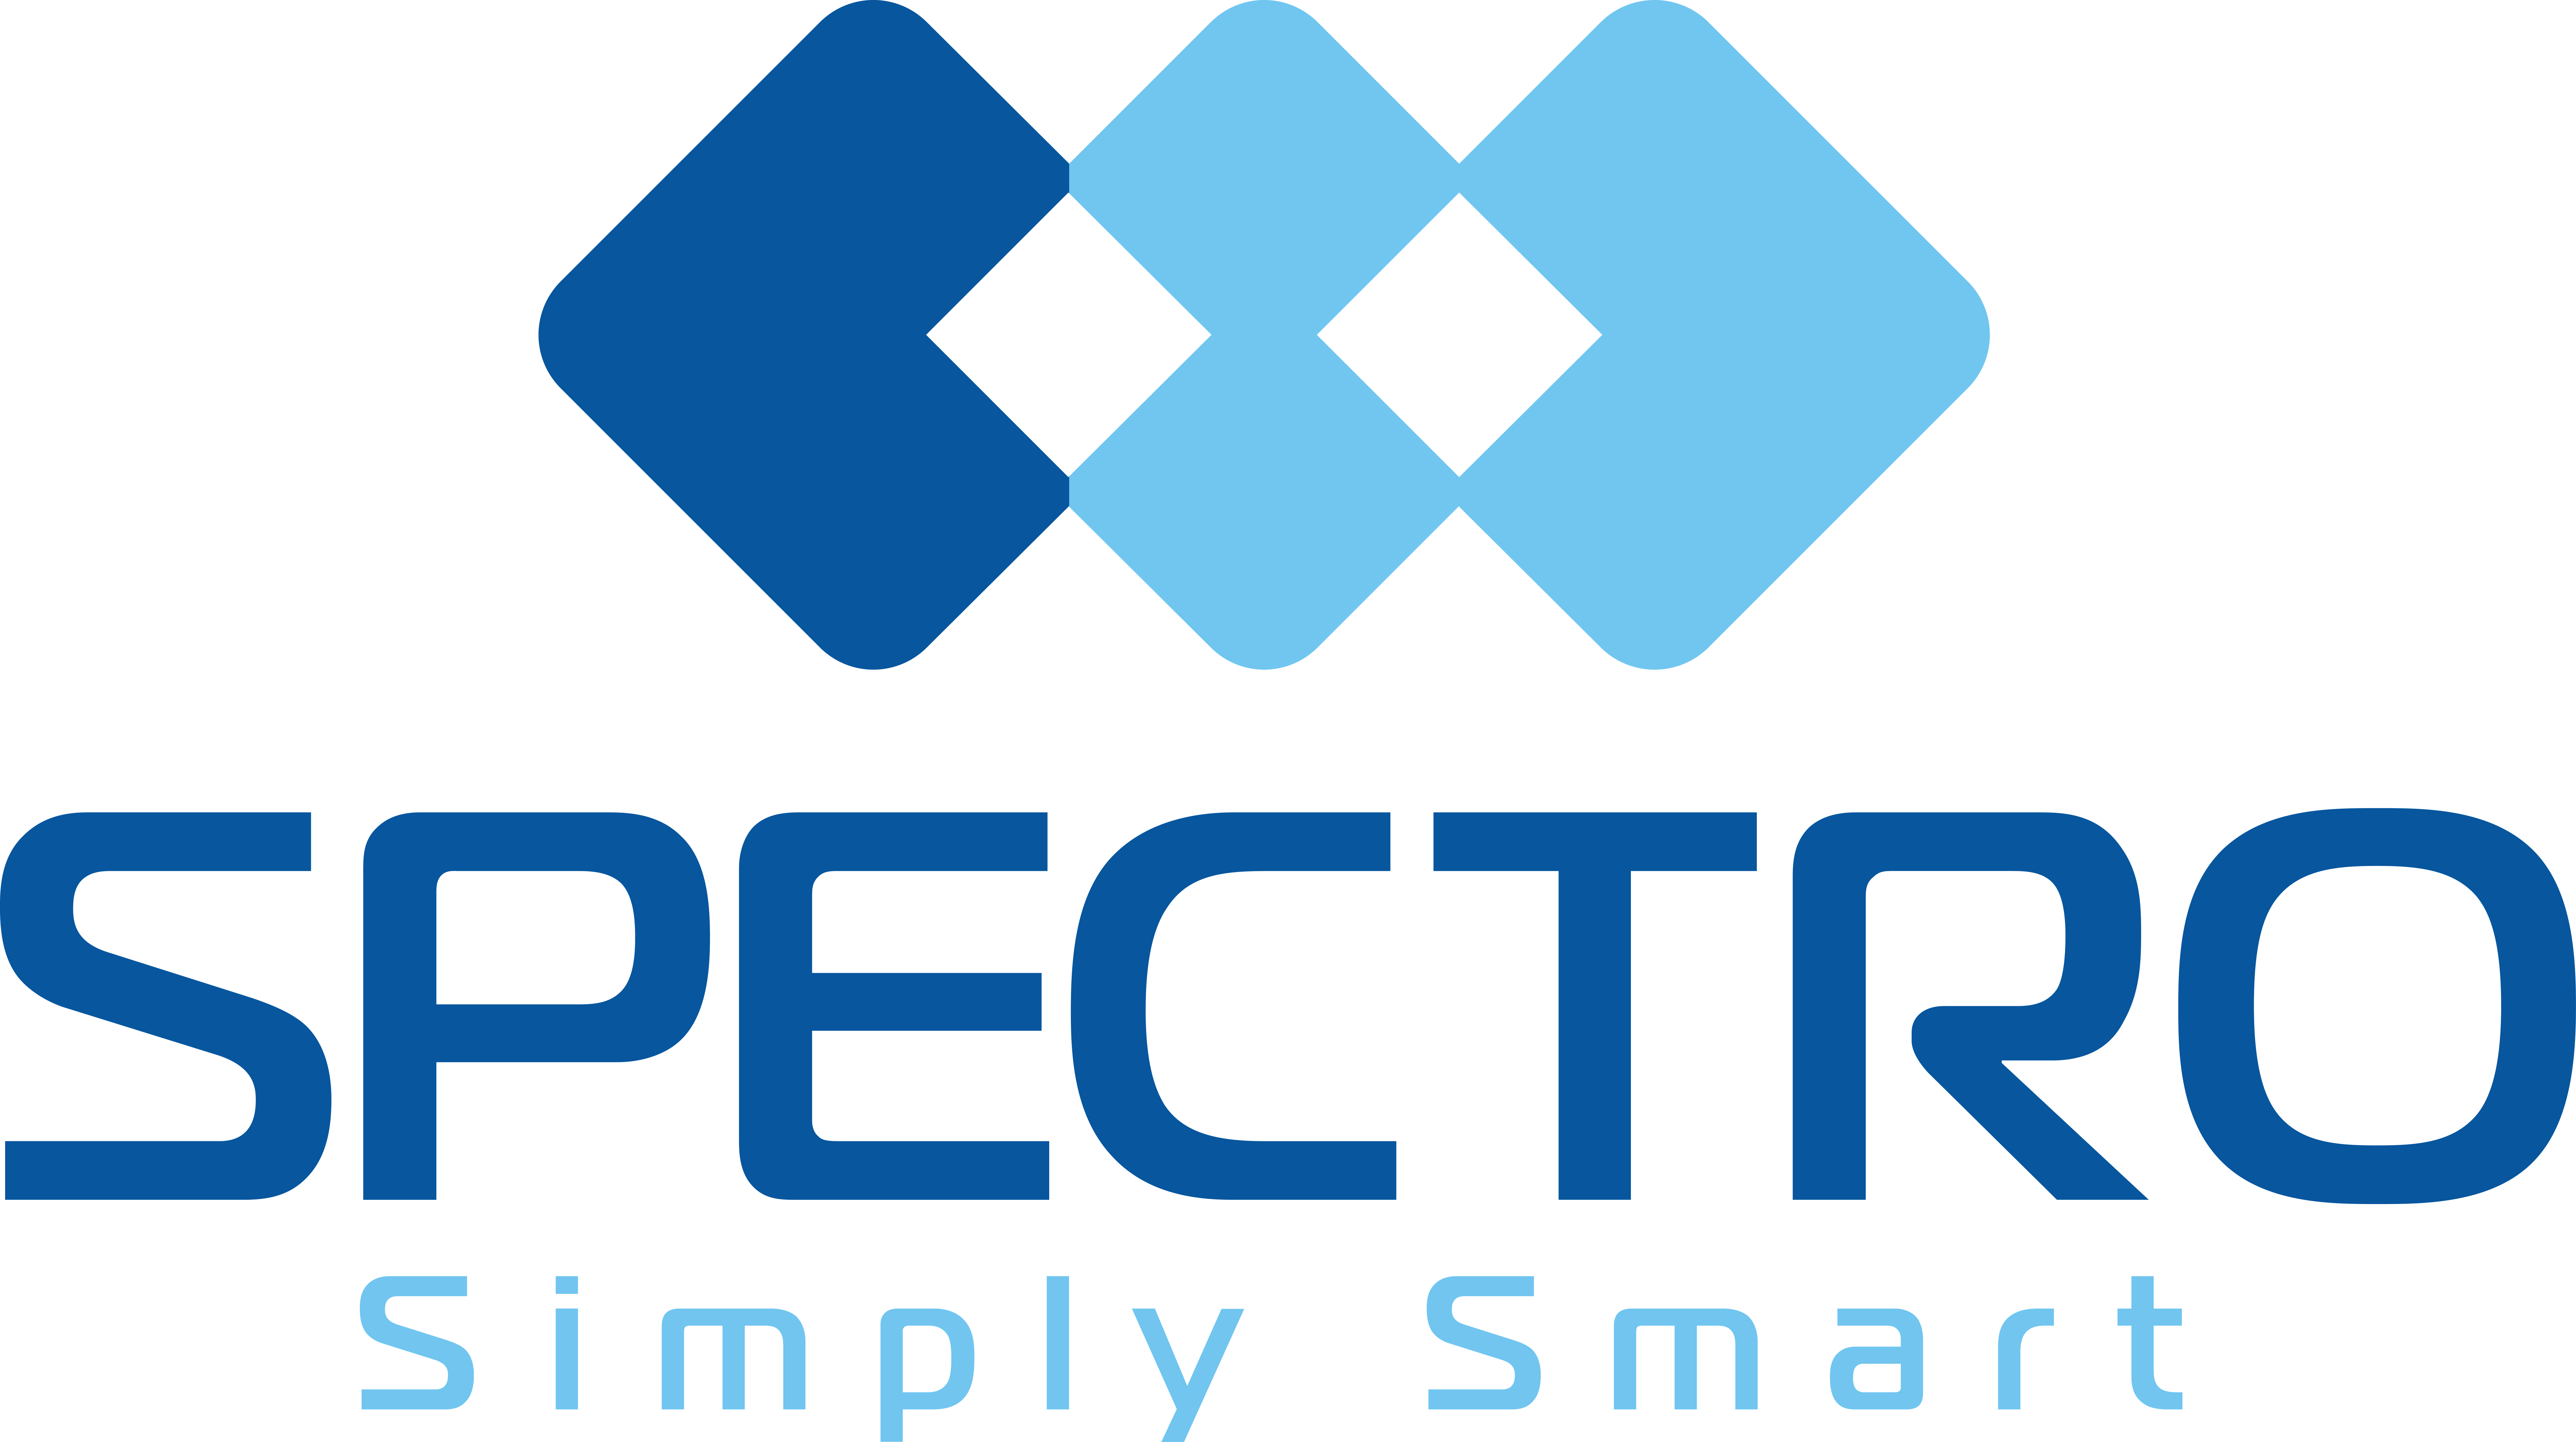 Spectro Systems